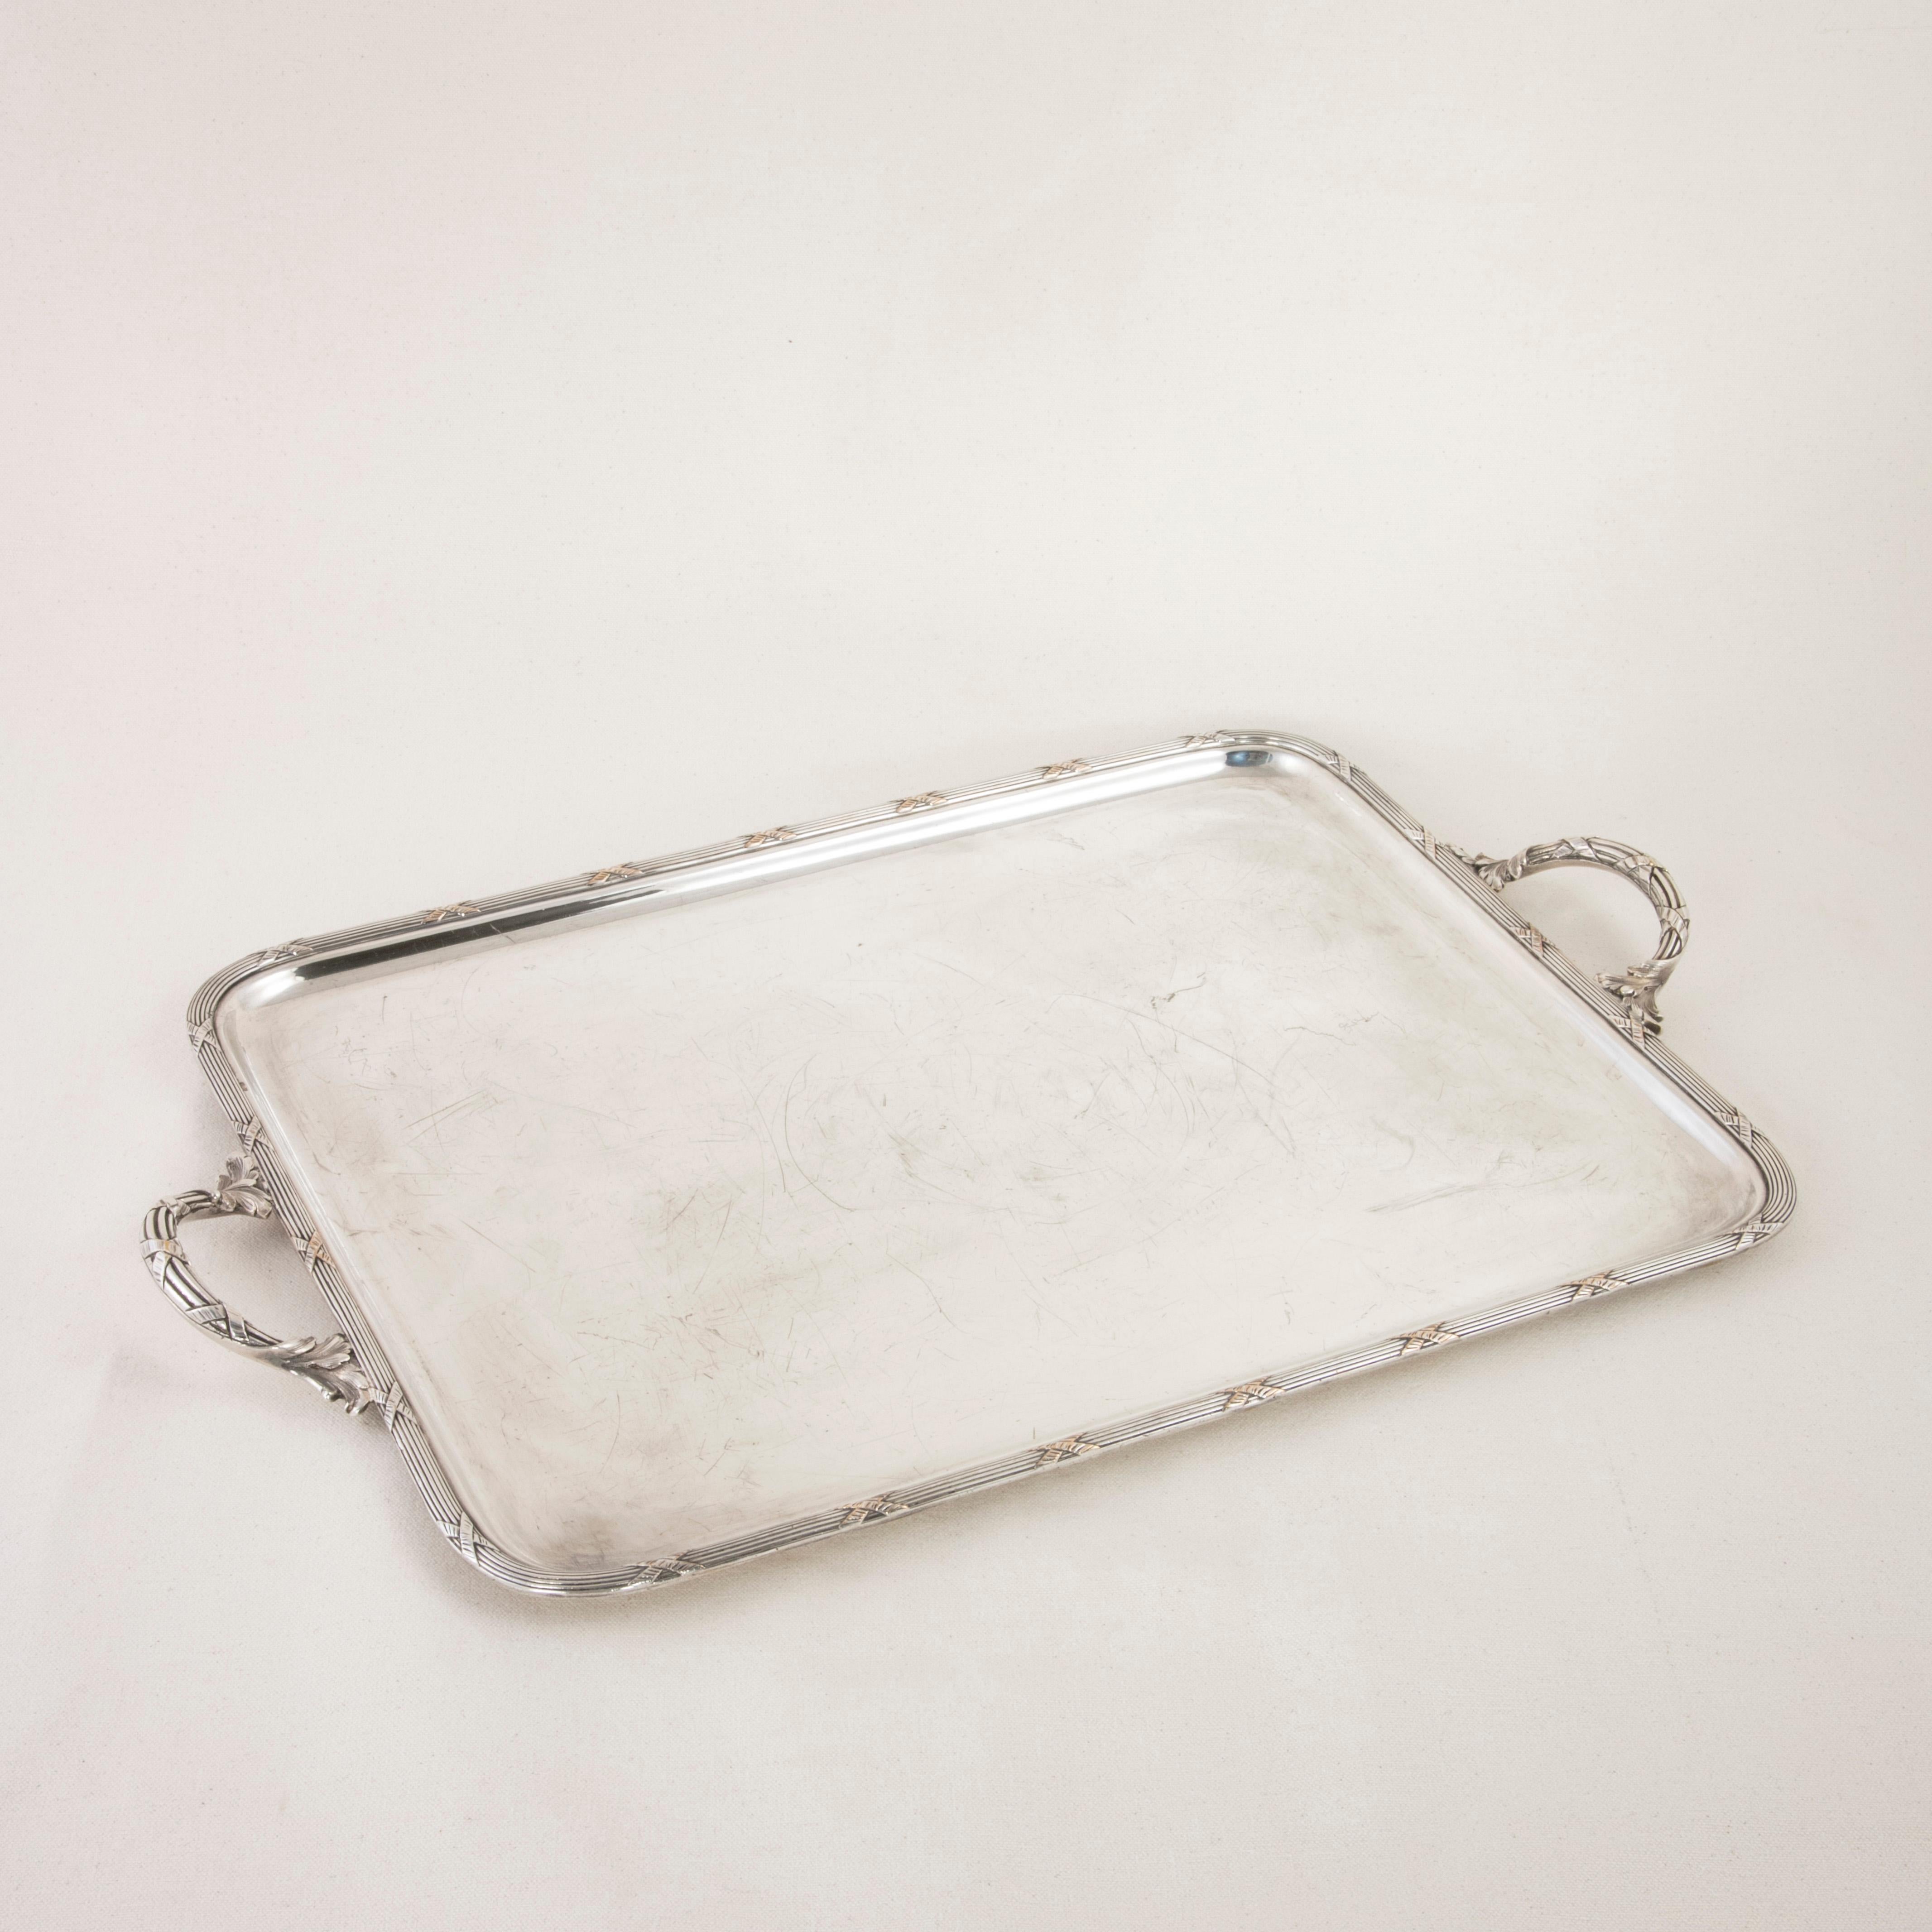 This late nineteenth century French silver plate serving tray features a raised rim with a classic Louis XVI motif of crossed ribbons. A handle at each end repeats the crossed ribbon motif with stylized leaves at the joints. An elegant serving piece